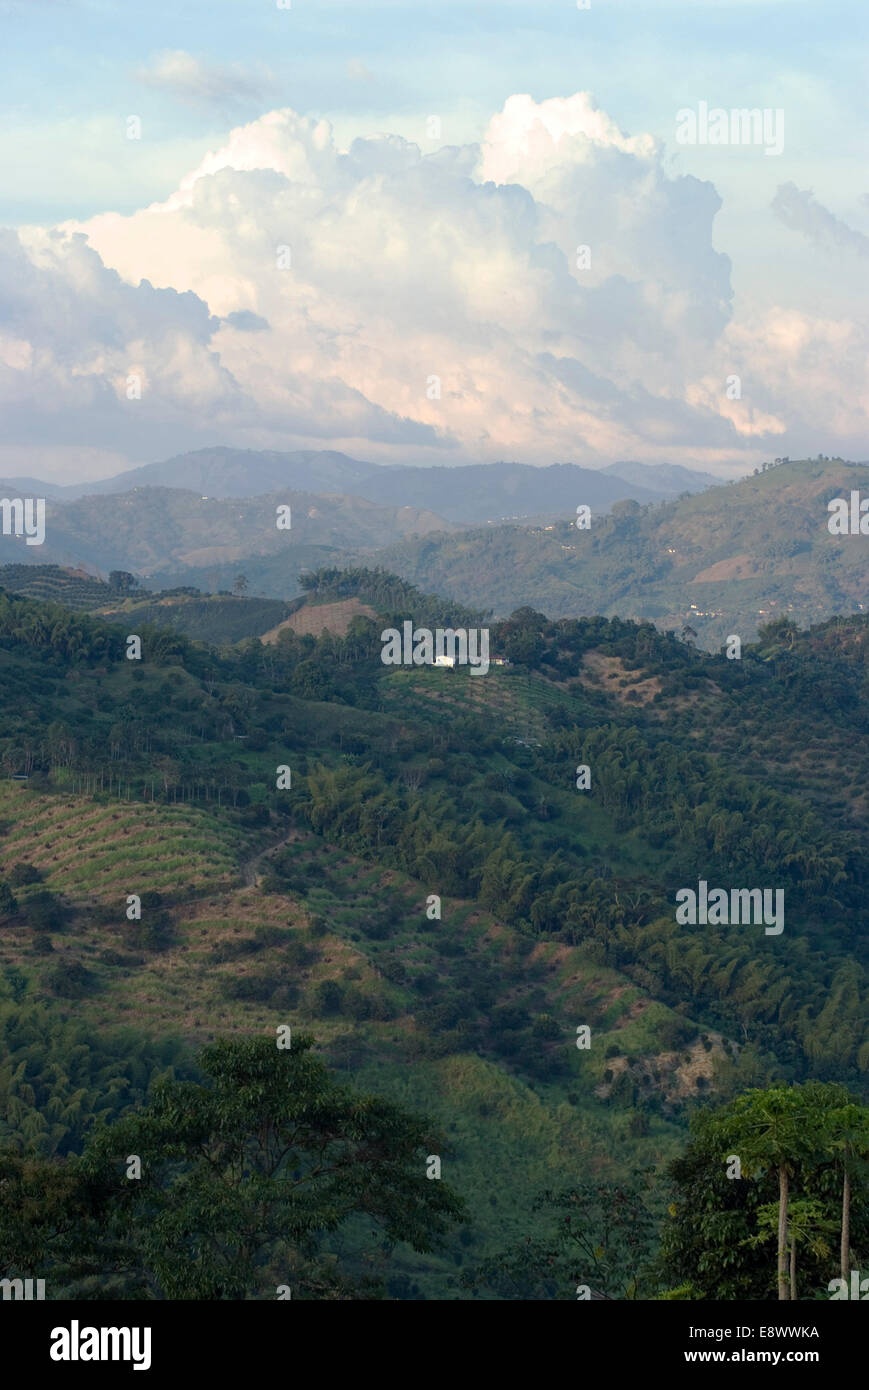 View near Manizales (city in the coffee-growing region), Colombia Stock Photo